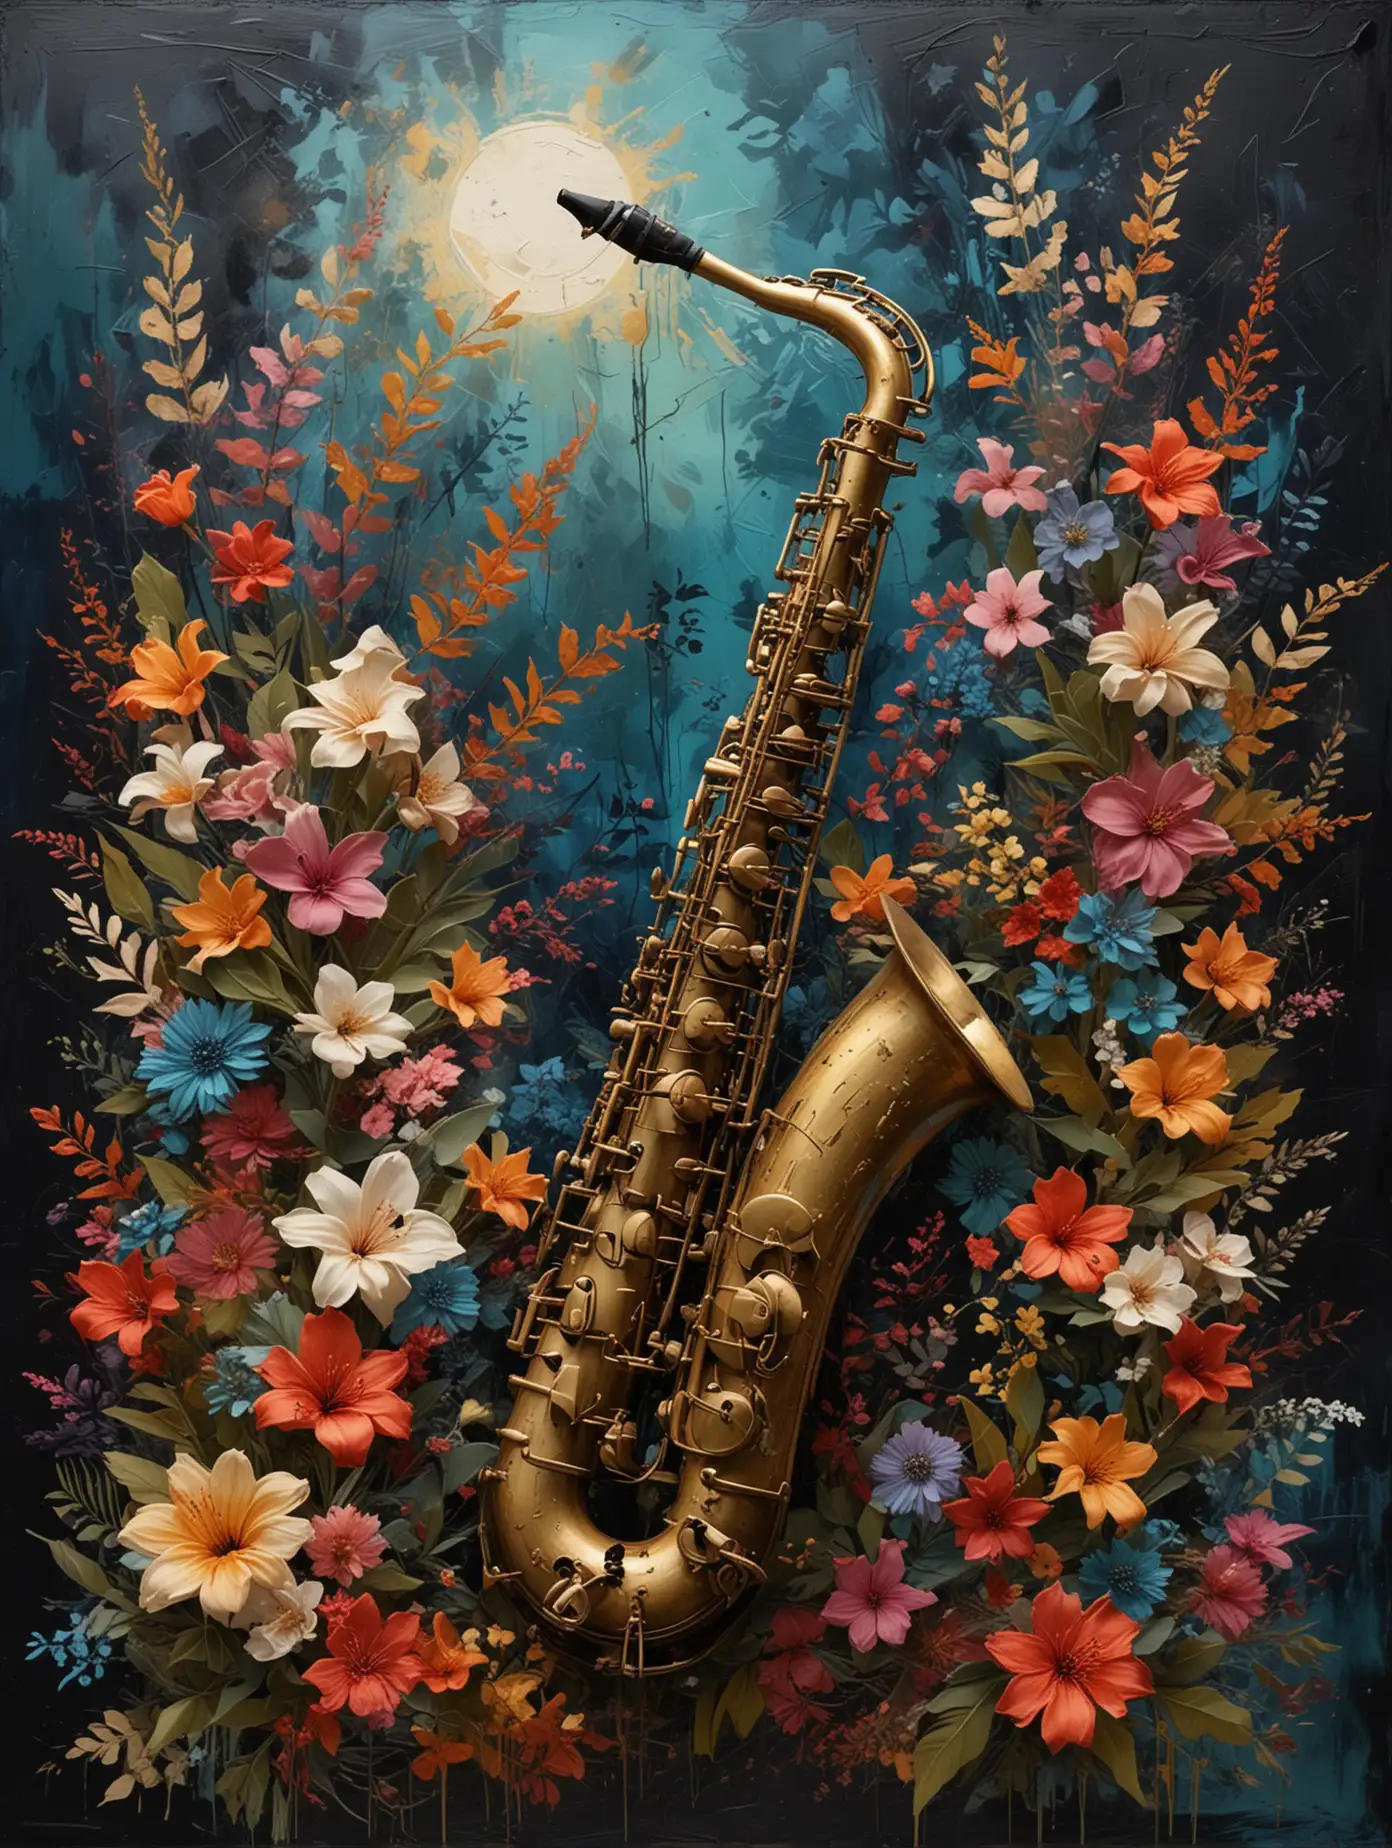 Saxophones Serenade Modern Art with Summer Night and Floral Elements